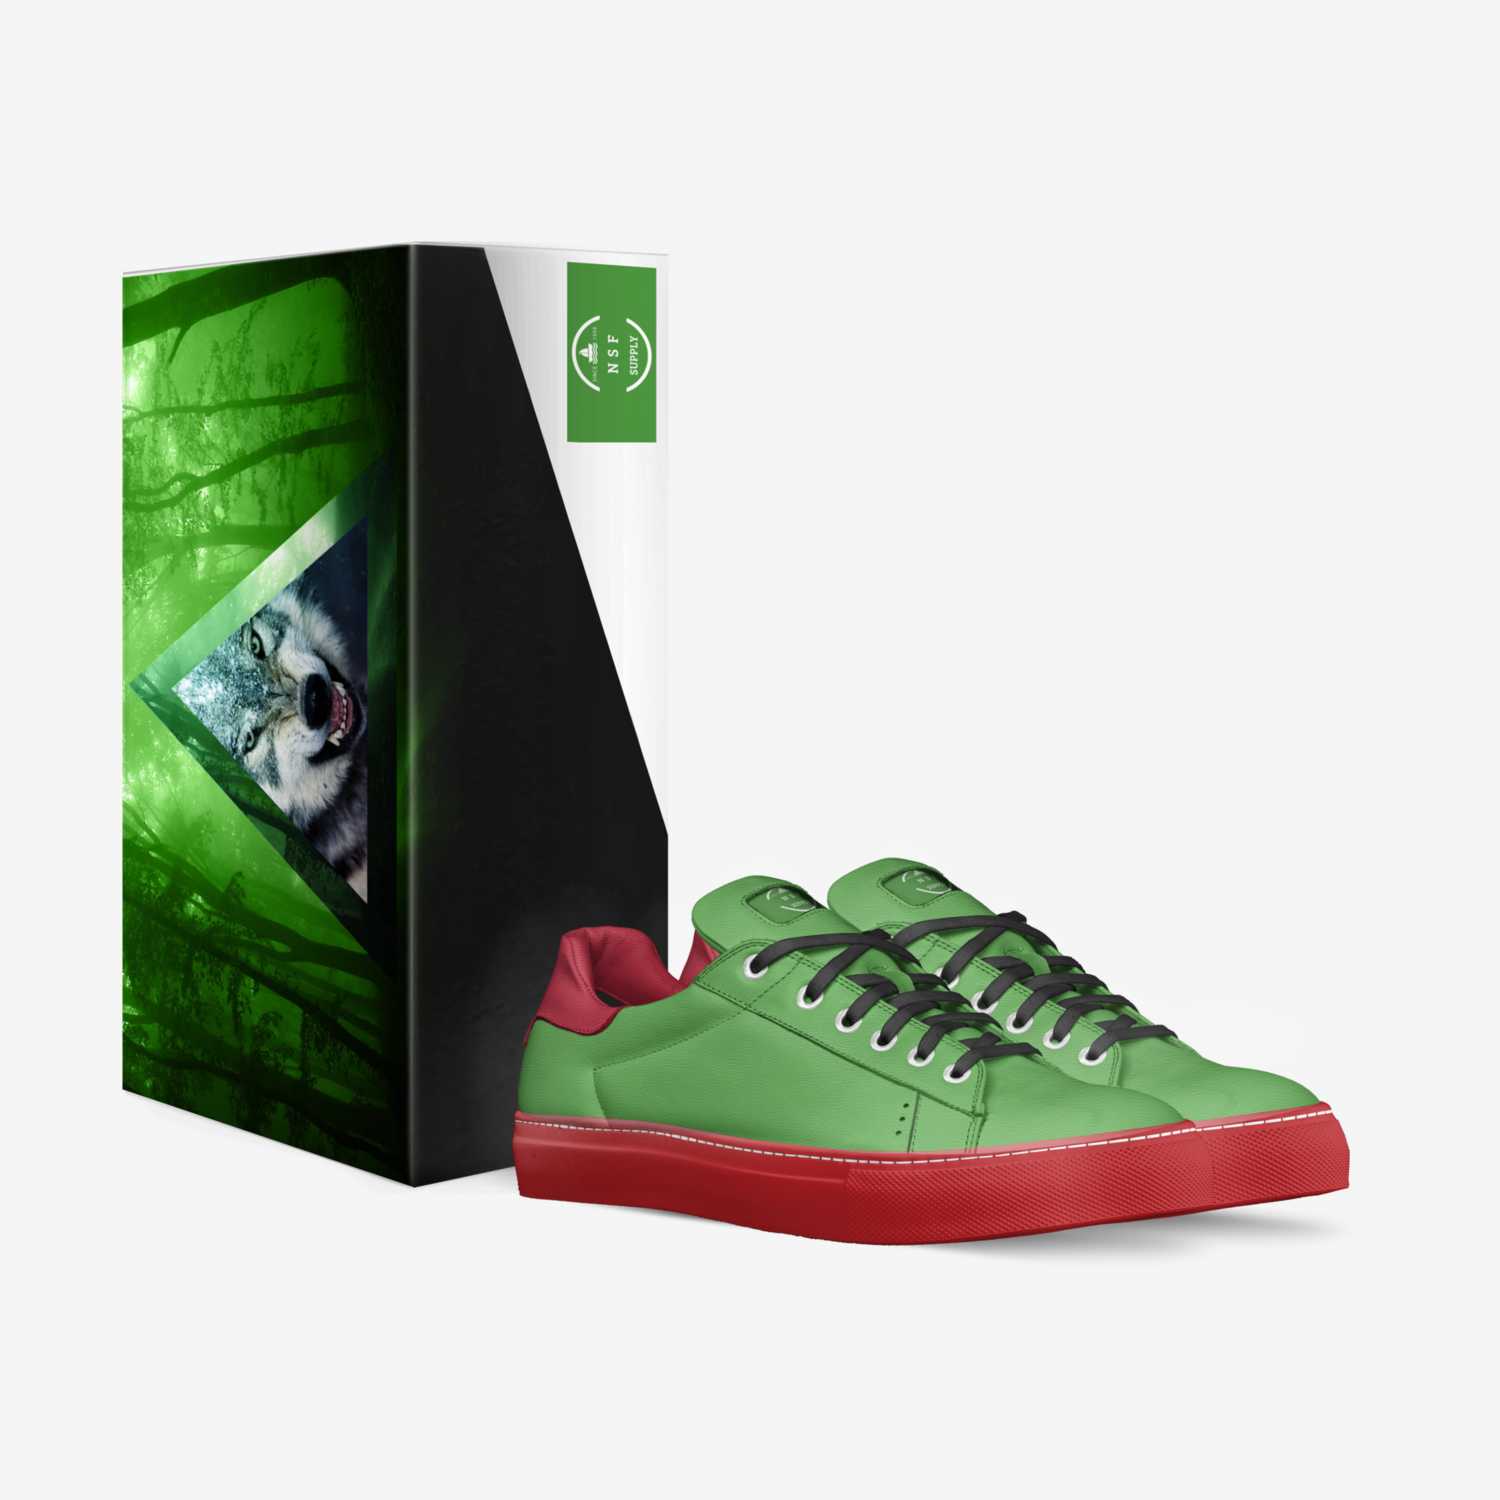 GREEN MACHINE(NSF) custom made in Italy shoes by Larry Miller | Box view